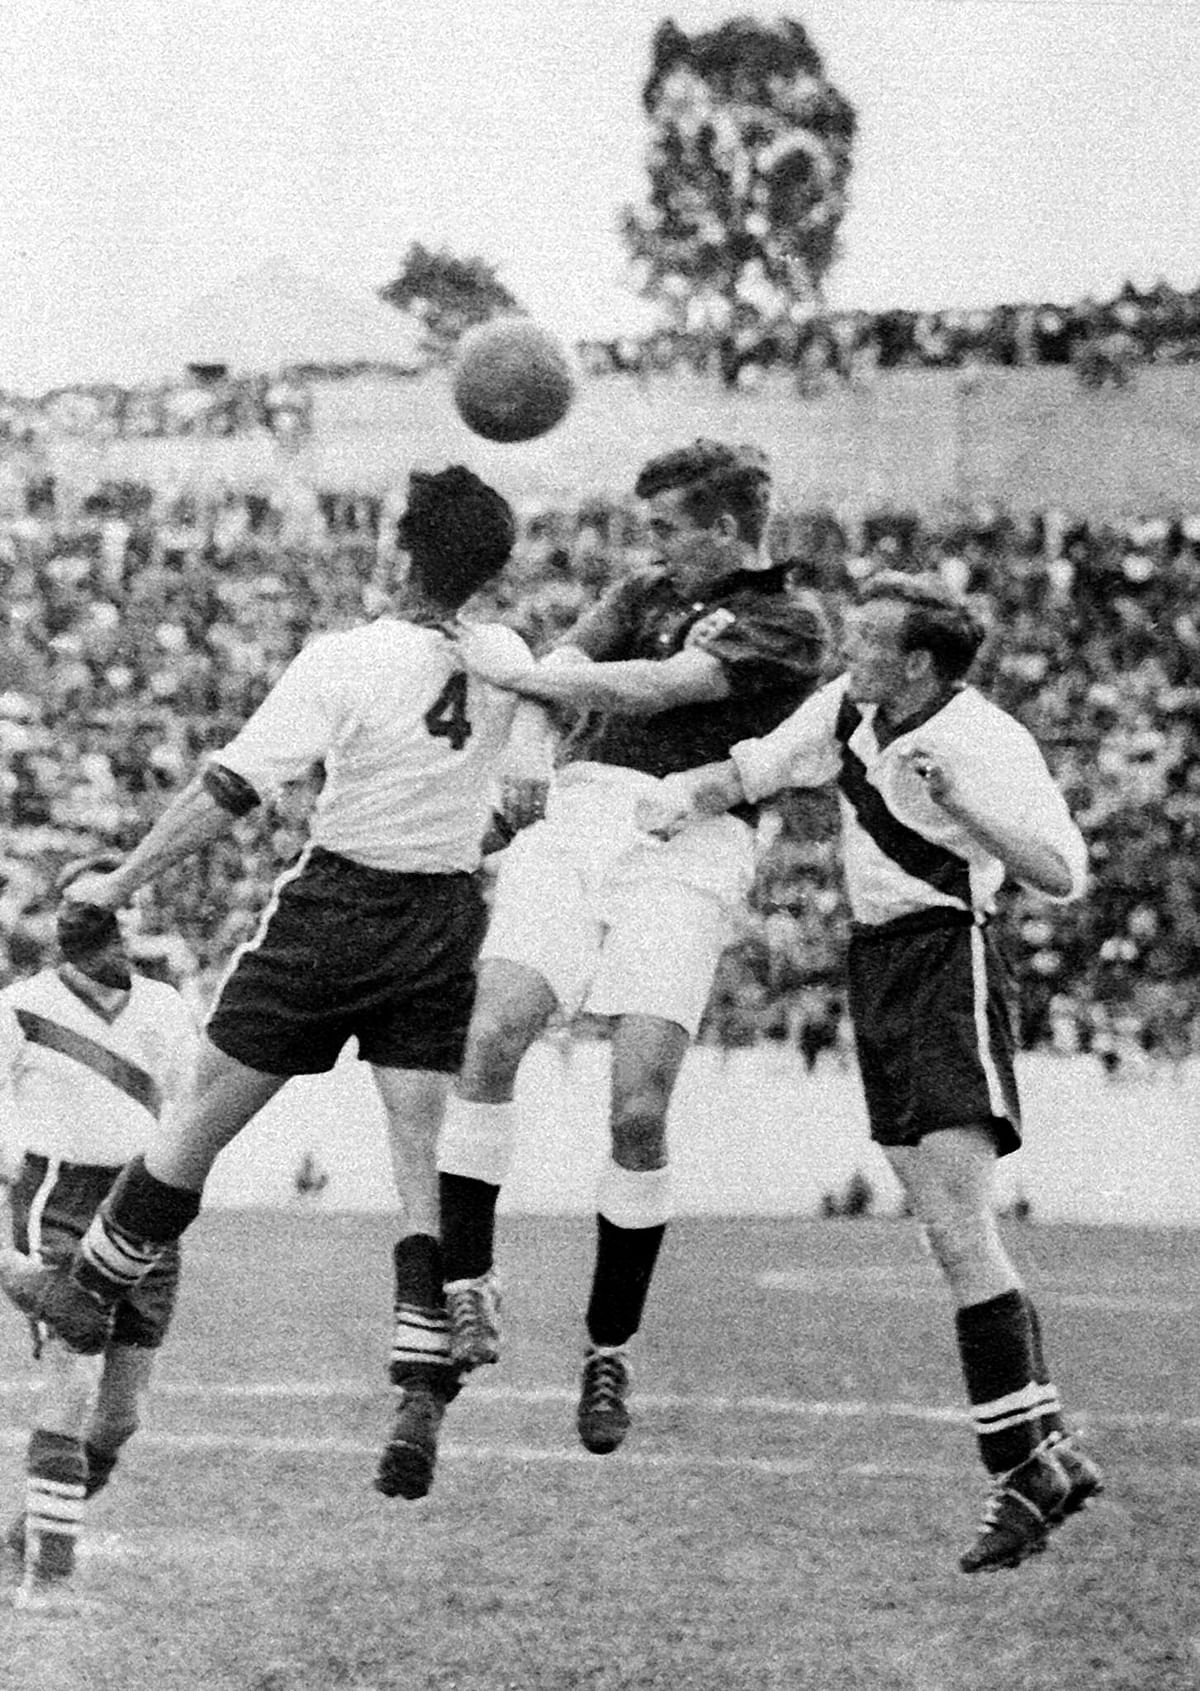 English midfielder Thomas Finney (C) tries to head the ball between American defenders Charlie Colombo and Walter Bahr 29 June 1950 in Belo Horizonte during the World Cup first-round match between England and the United States. Heavily-favored England was upset by the United States 1-0 on a goal scored by forward Joseph Gaetjens. Photo: AFP